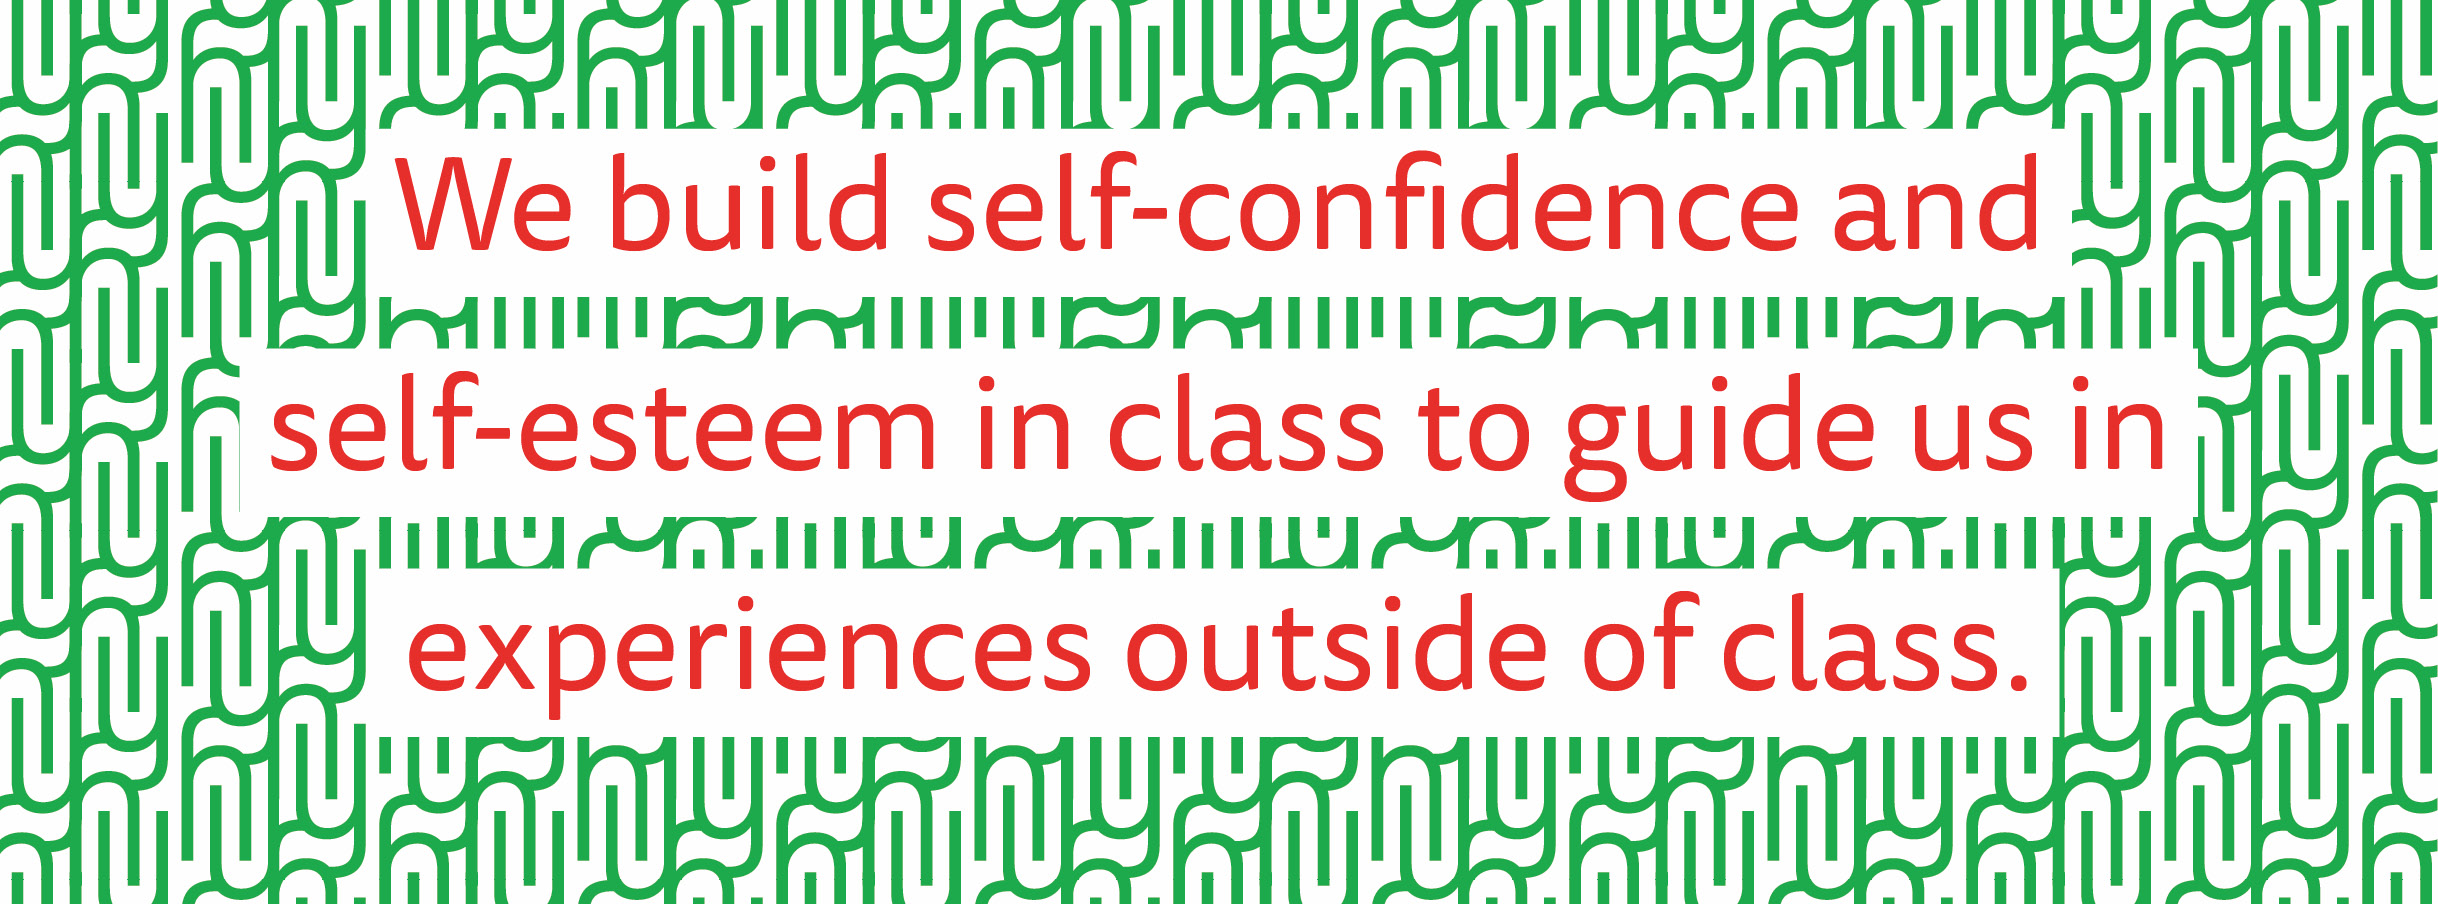 We build self-confidence and self-esteem in class  to guide us  in experiences outside of class.’ Value statement set in magenta a humanist san serif typeface, with a white background. The statement is on top of a green pattern created by Y and H from the logo.